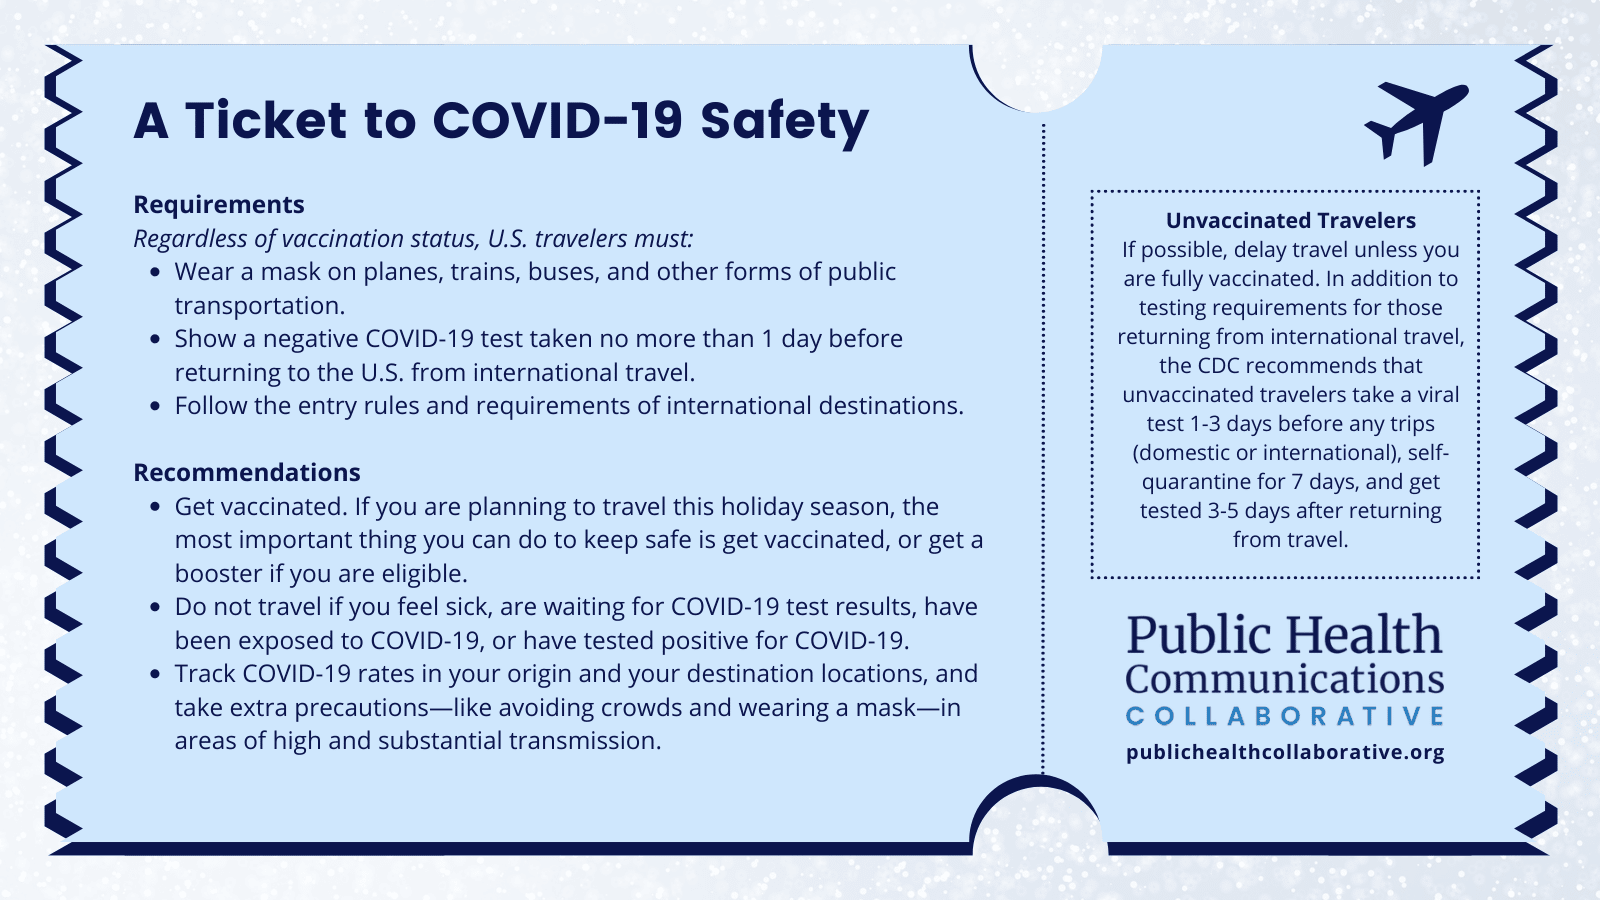 Shareable Graphic: Travel Tips for COVID-19 Safety